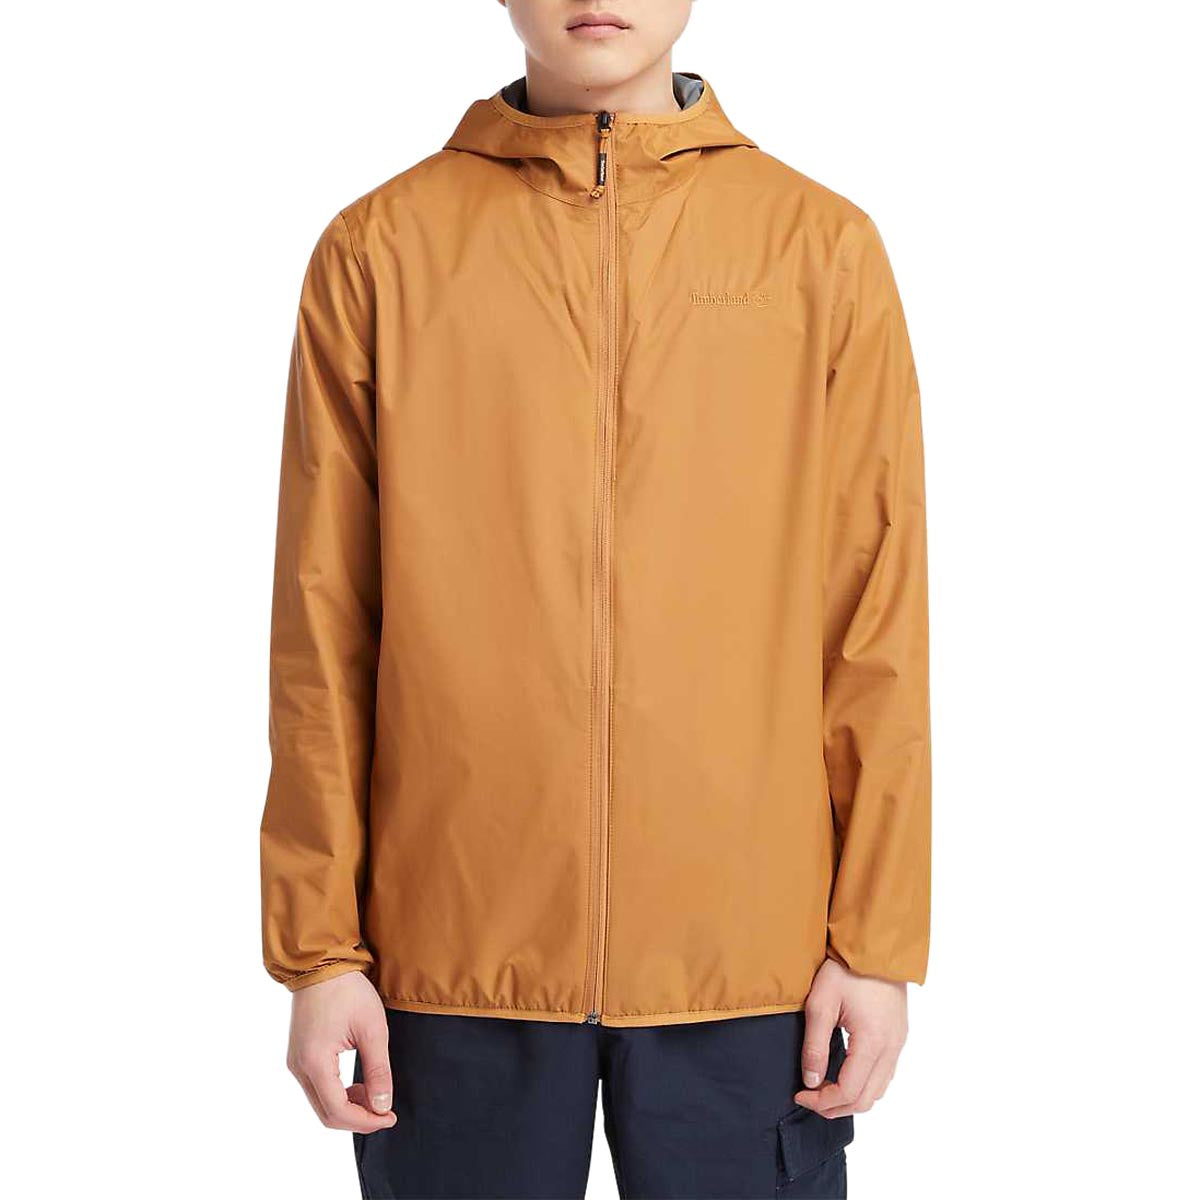 Timberland 2.5l Wind Resistant Jacket - Wheat image 1